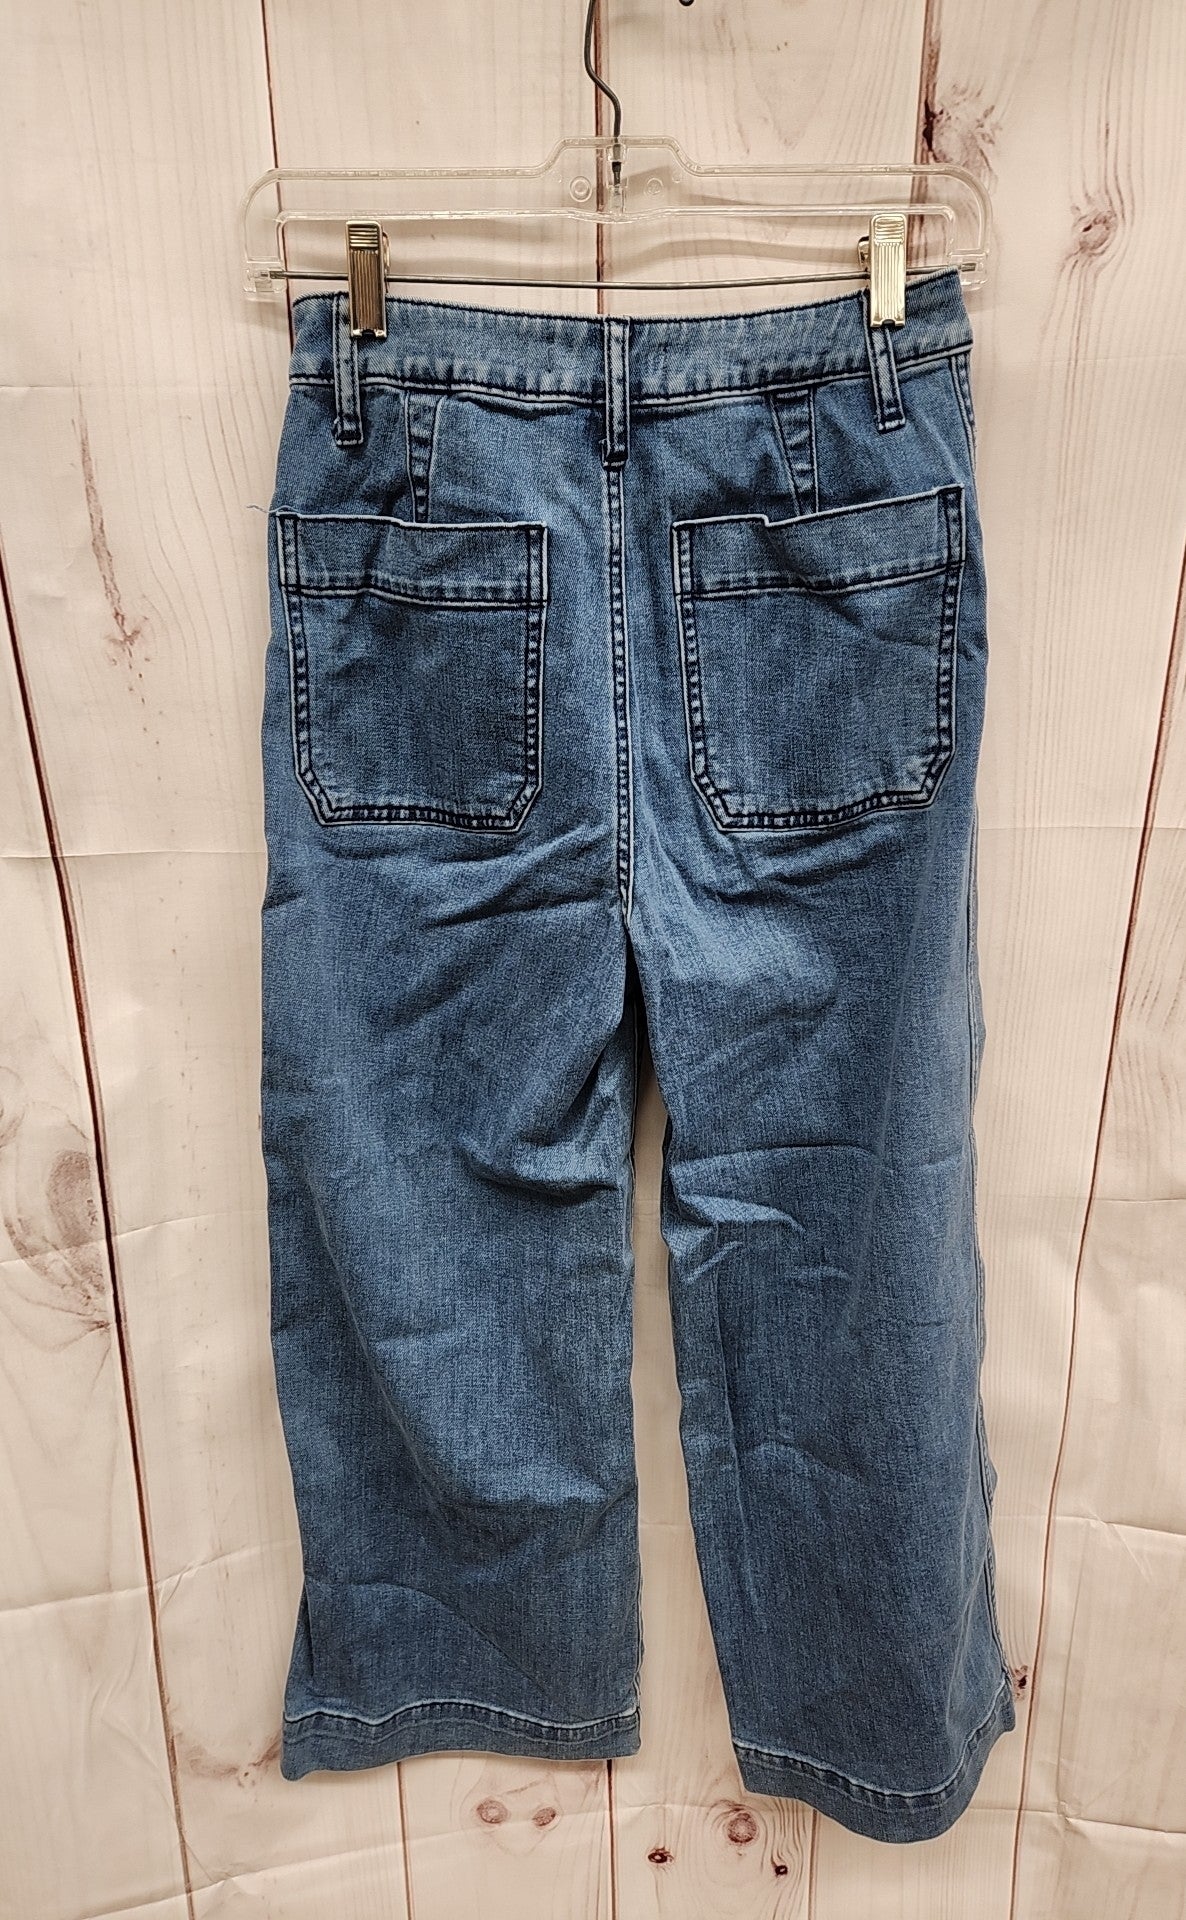 Madewell Women's Size 26 (1-2) Blue Jeans